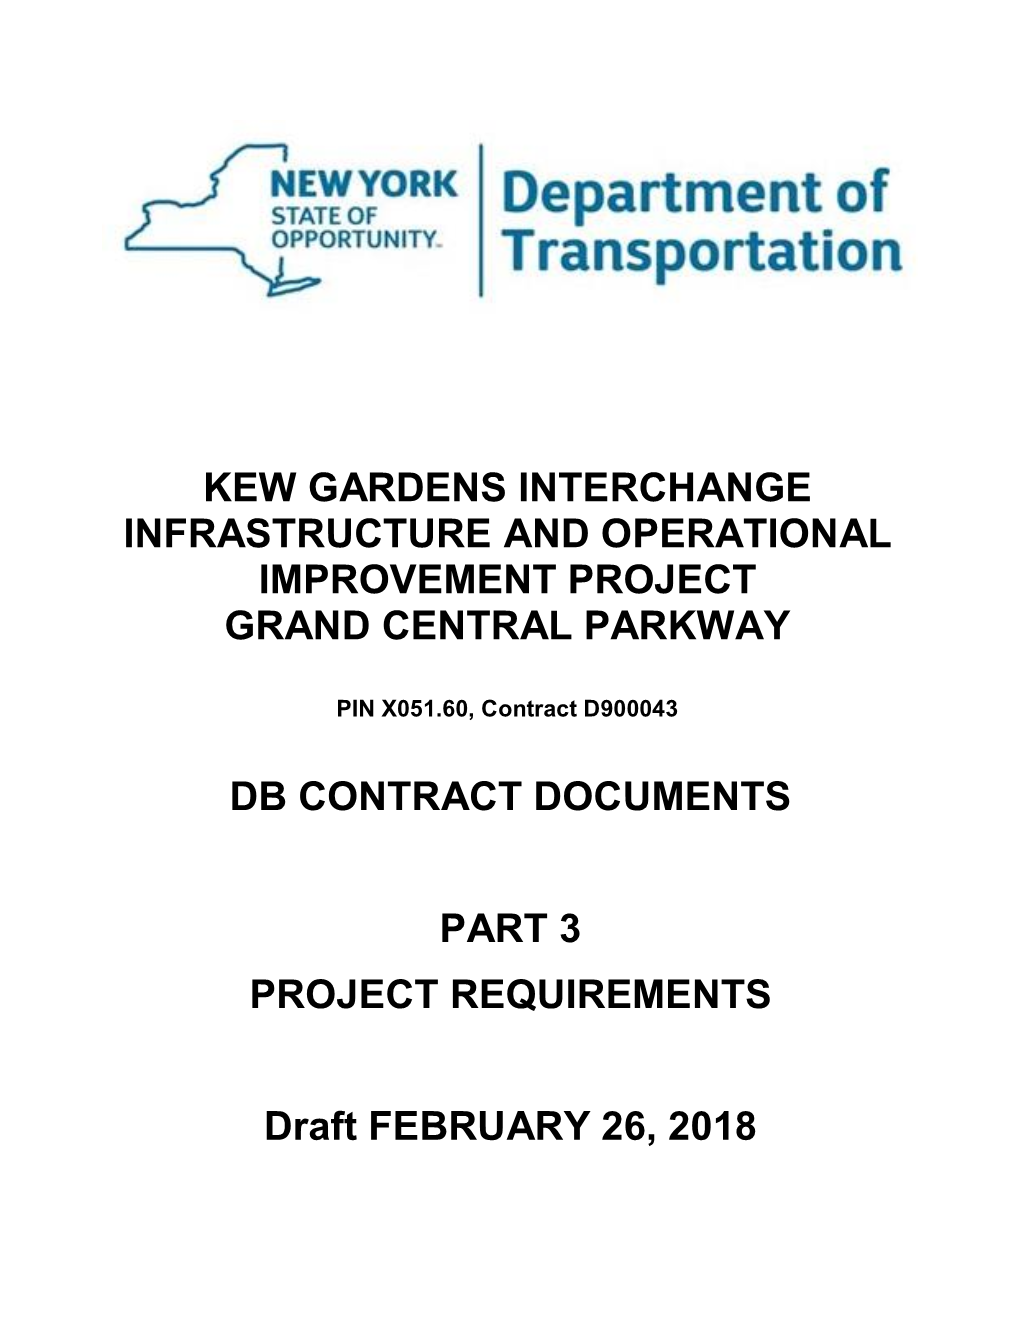 Kew Gardens Interchange Infrastructure and Operational Improvement Project Grand Central Parkway